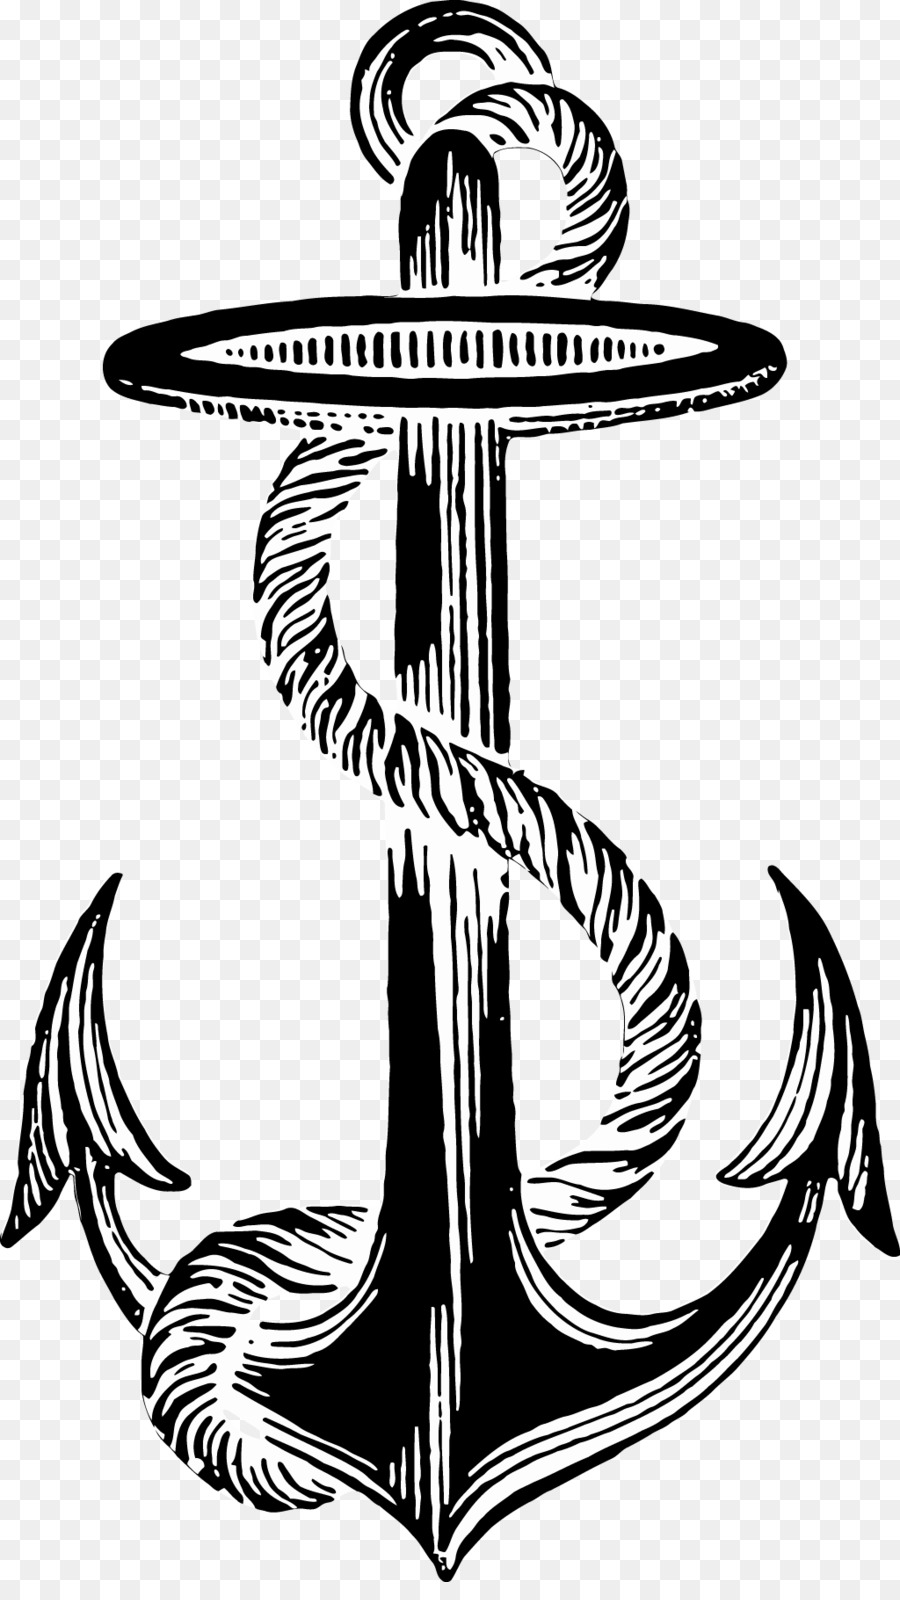 Anchor Clip art - anchor png download - 1024*1800 - Free Transparent Anchor png Download.